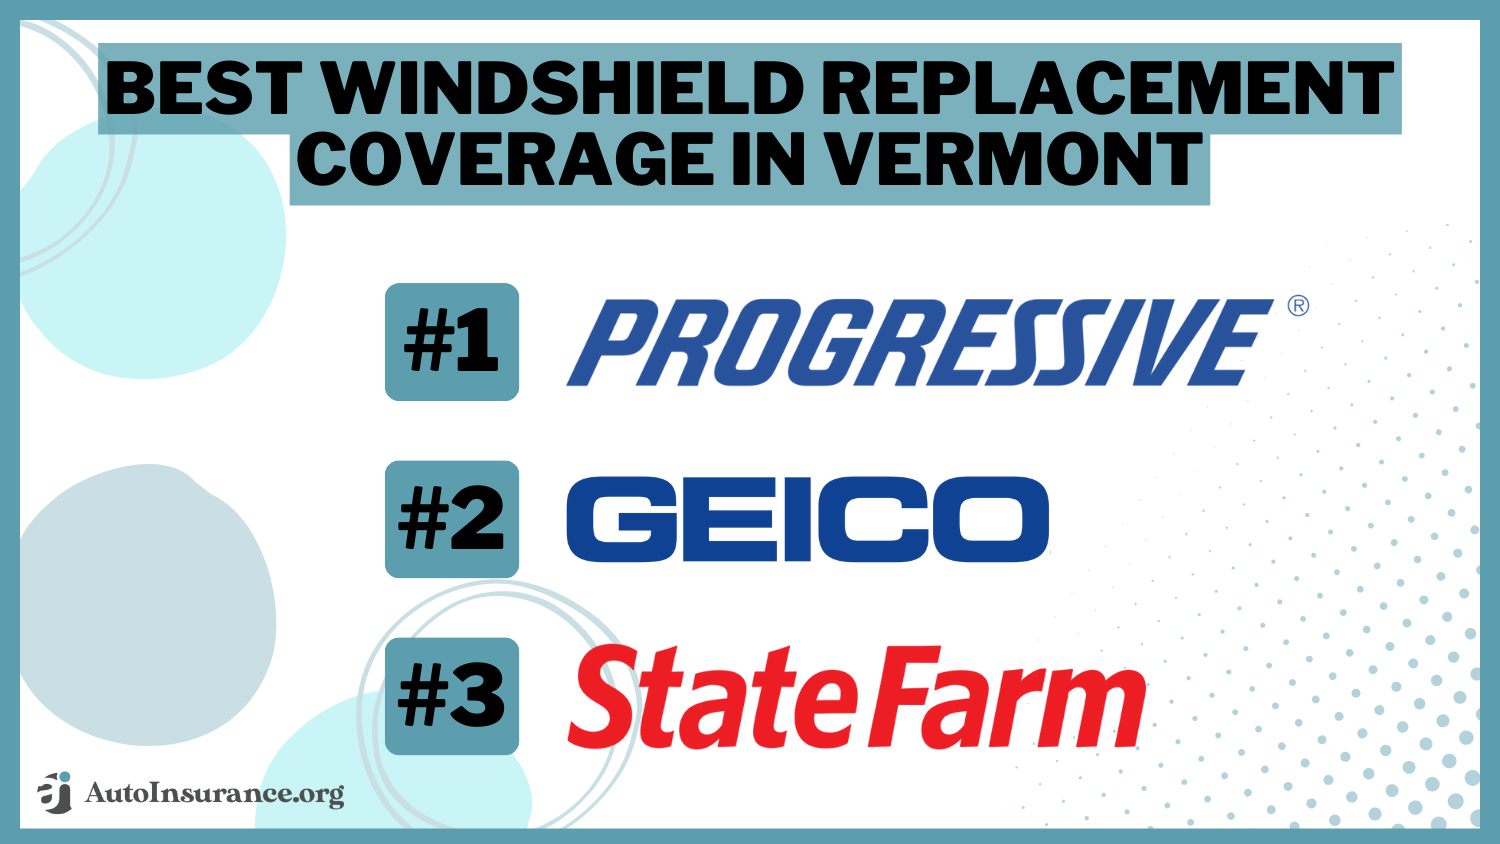 best windshield replacement coverage in Vermont: Progressive, Geico, State Farm